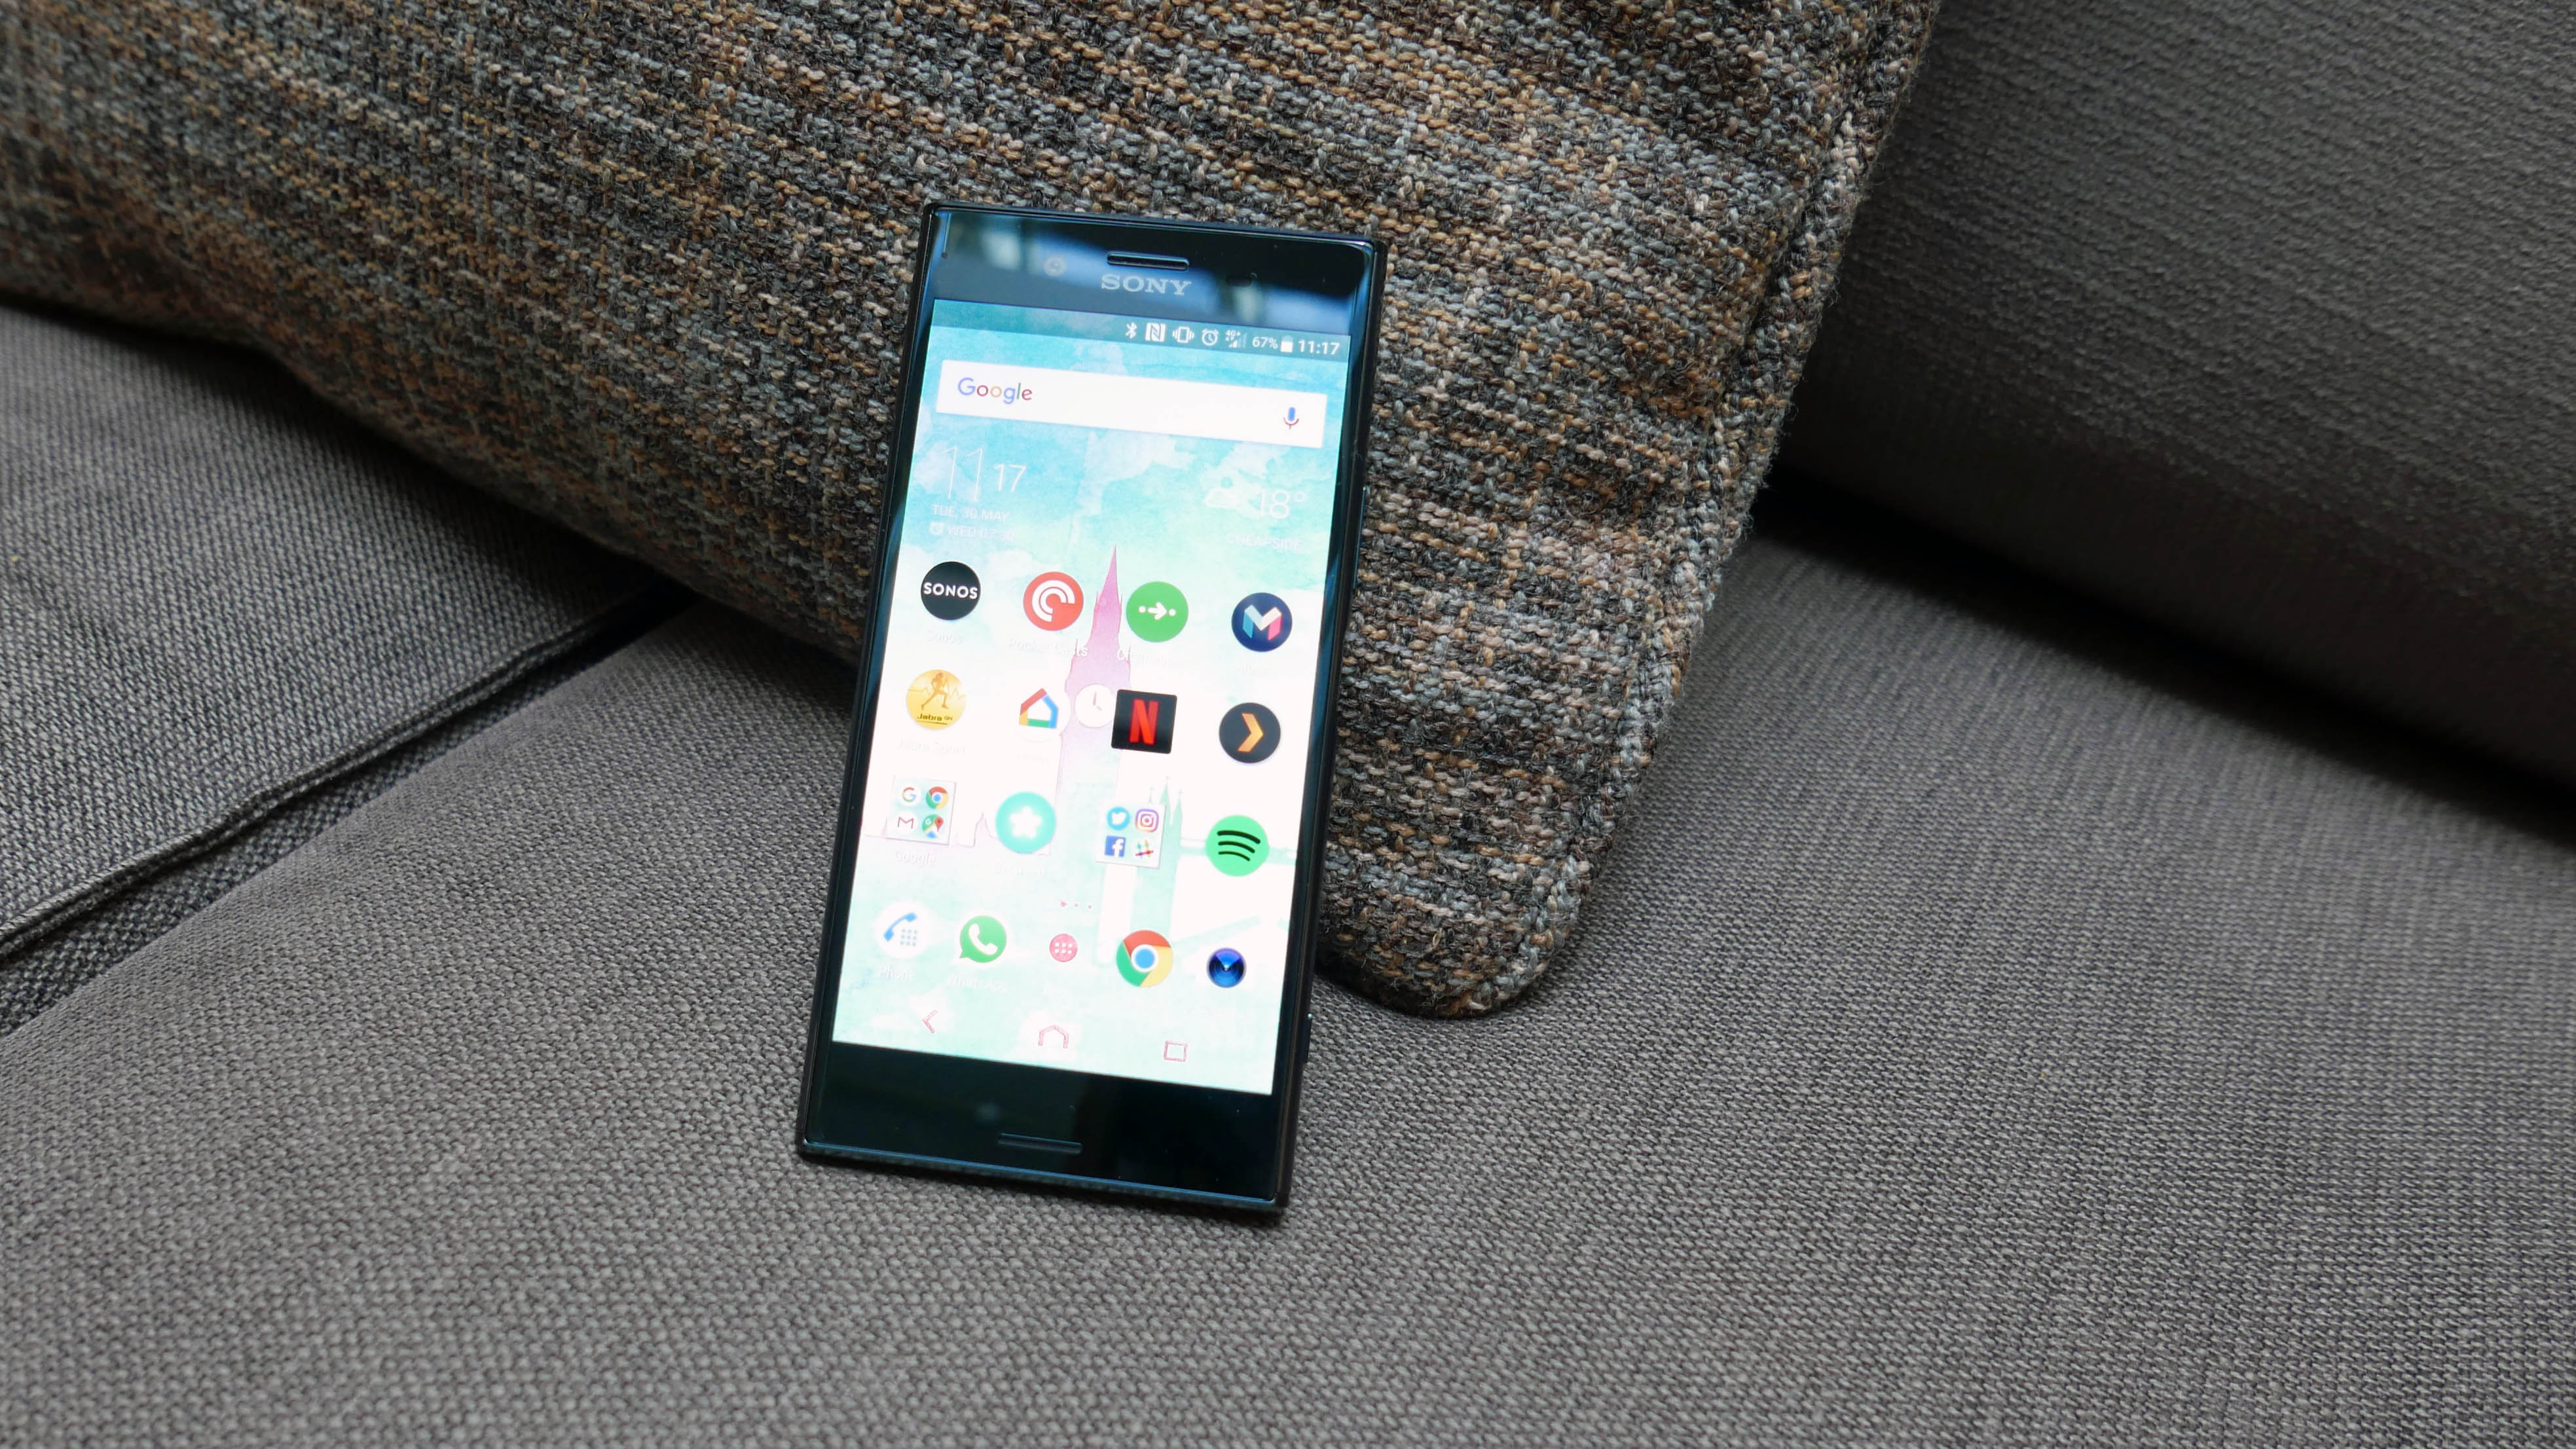 Sony Xperia XZ Premium – Battery life and verdict | Trusted Reviews